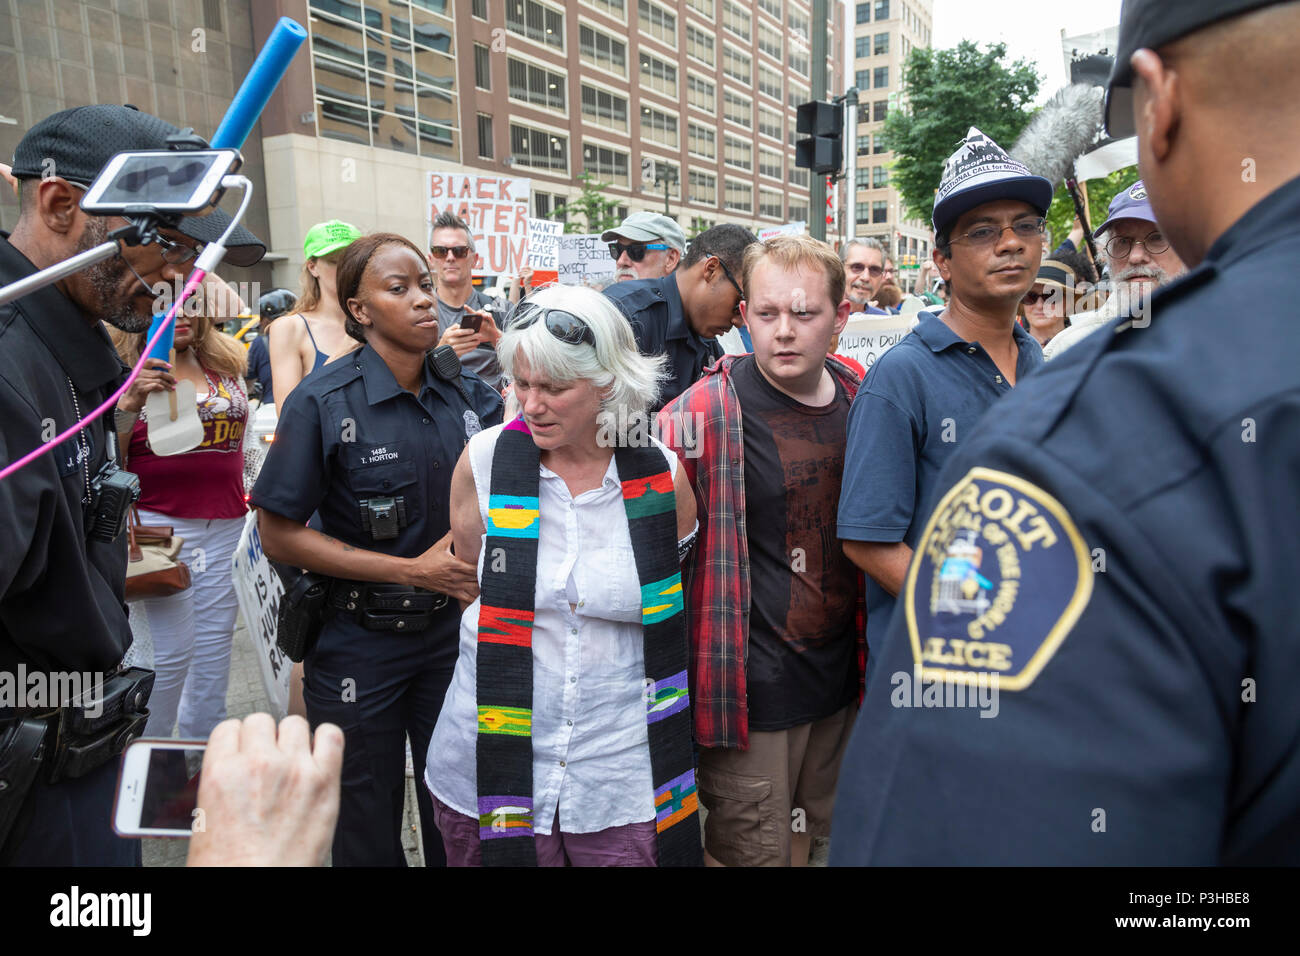 Detroit, Michigan USA - 18 June 2018 - Several hundred people rallied in Detroit to support the Poor Peoples Campaign against poverty, racism, militarism, and ecological devastation. Rev. Denise Griebler, pastor of First United Church of Christ in Richmond, Michigan, was among two dozen arrested for blocking the QLine streetcar to highlight the need for better public transportation in Detroit. Credit: Jim West/Alamy Live News Stock Photo